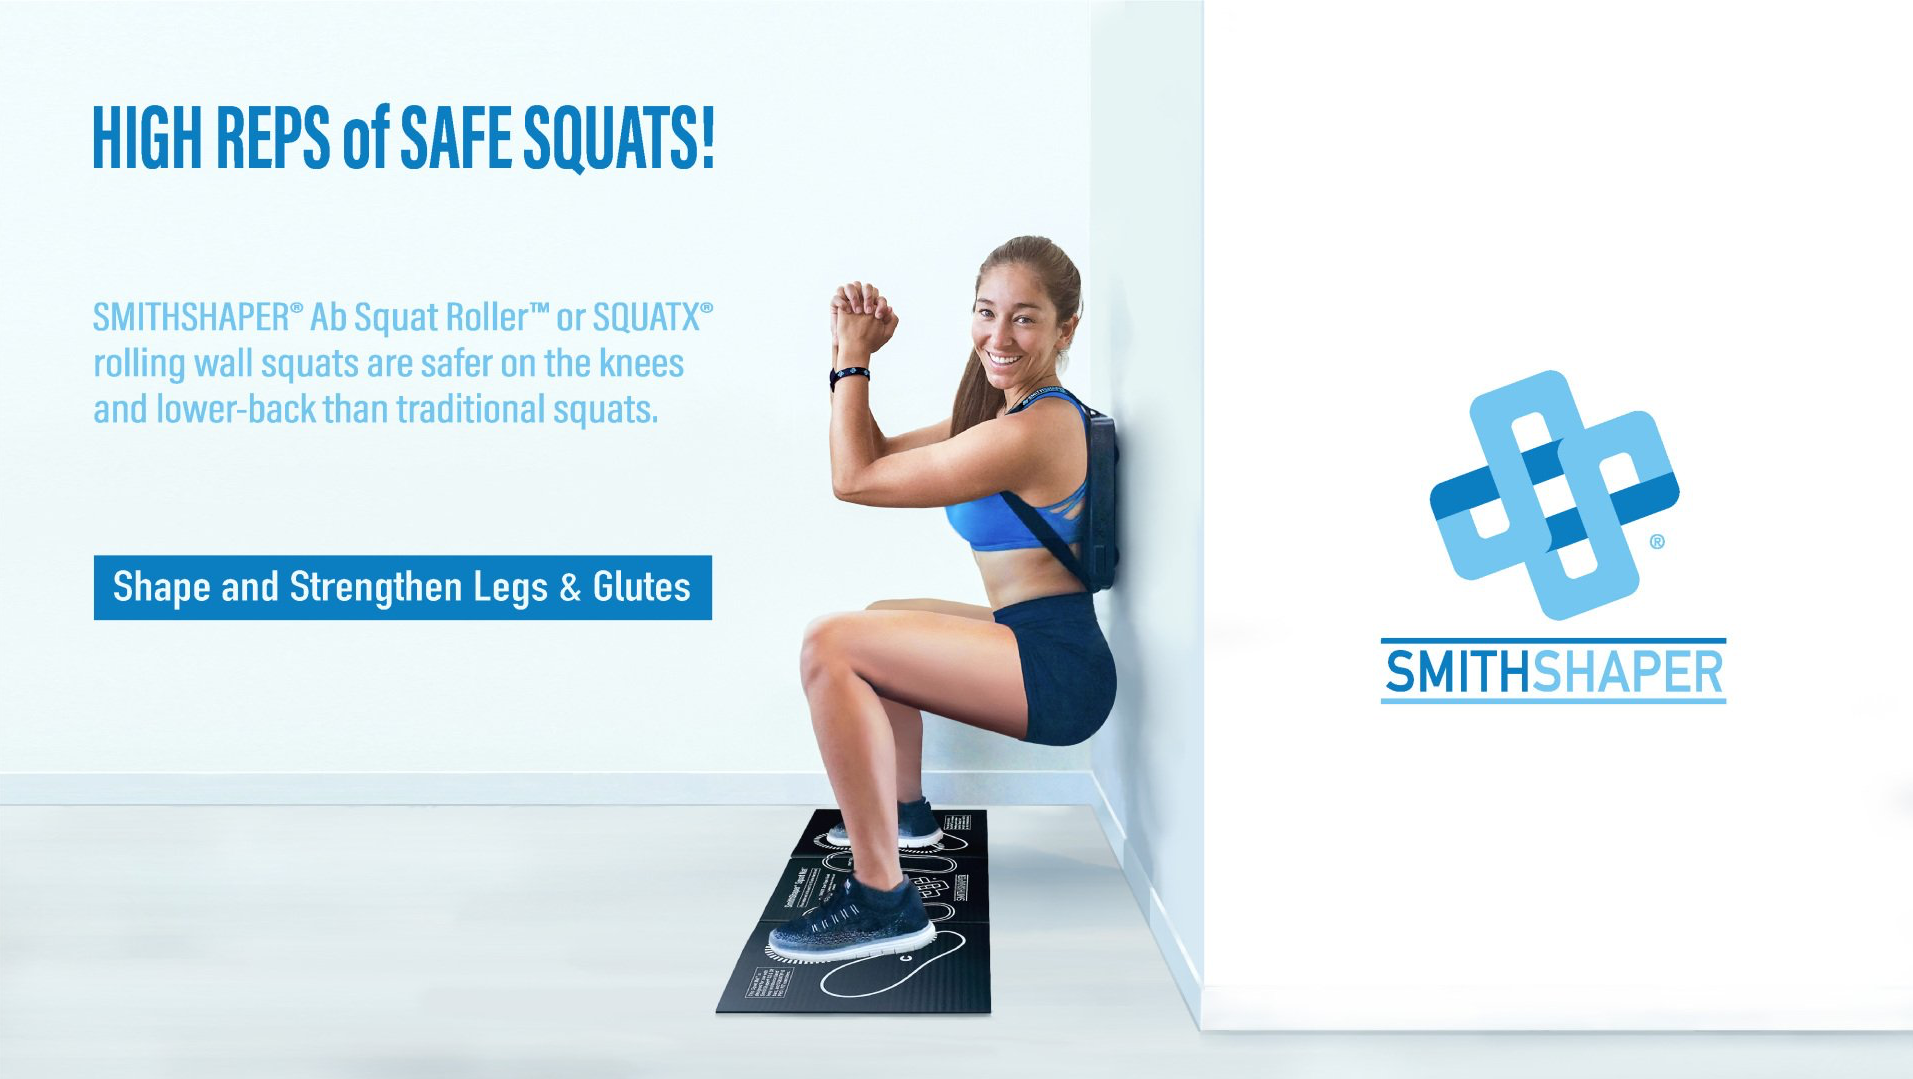 The U.S. patented rolling SmithShaper ASR and SQUATX multipurpose exercisers are a home gym staple due to the effectiveness of the device to strengthen legs and glutes.